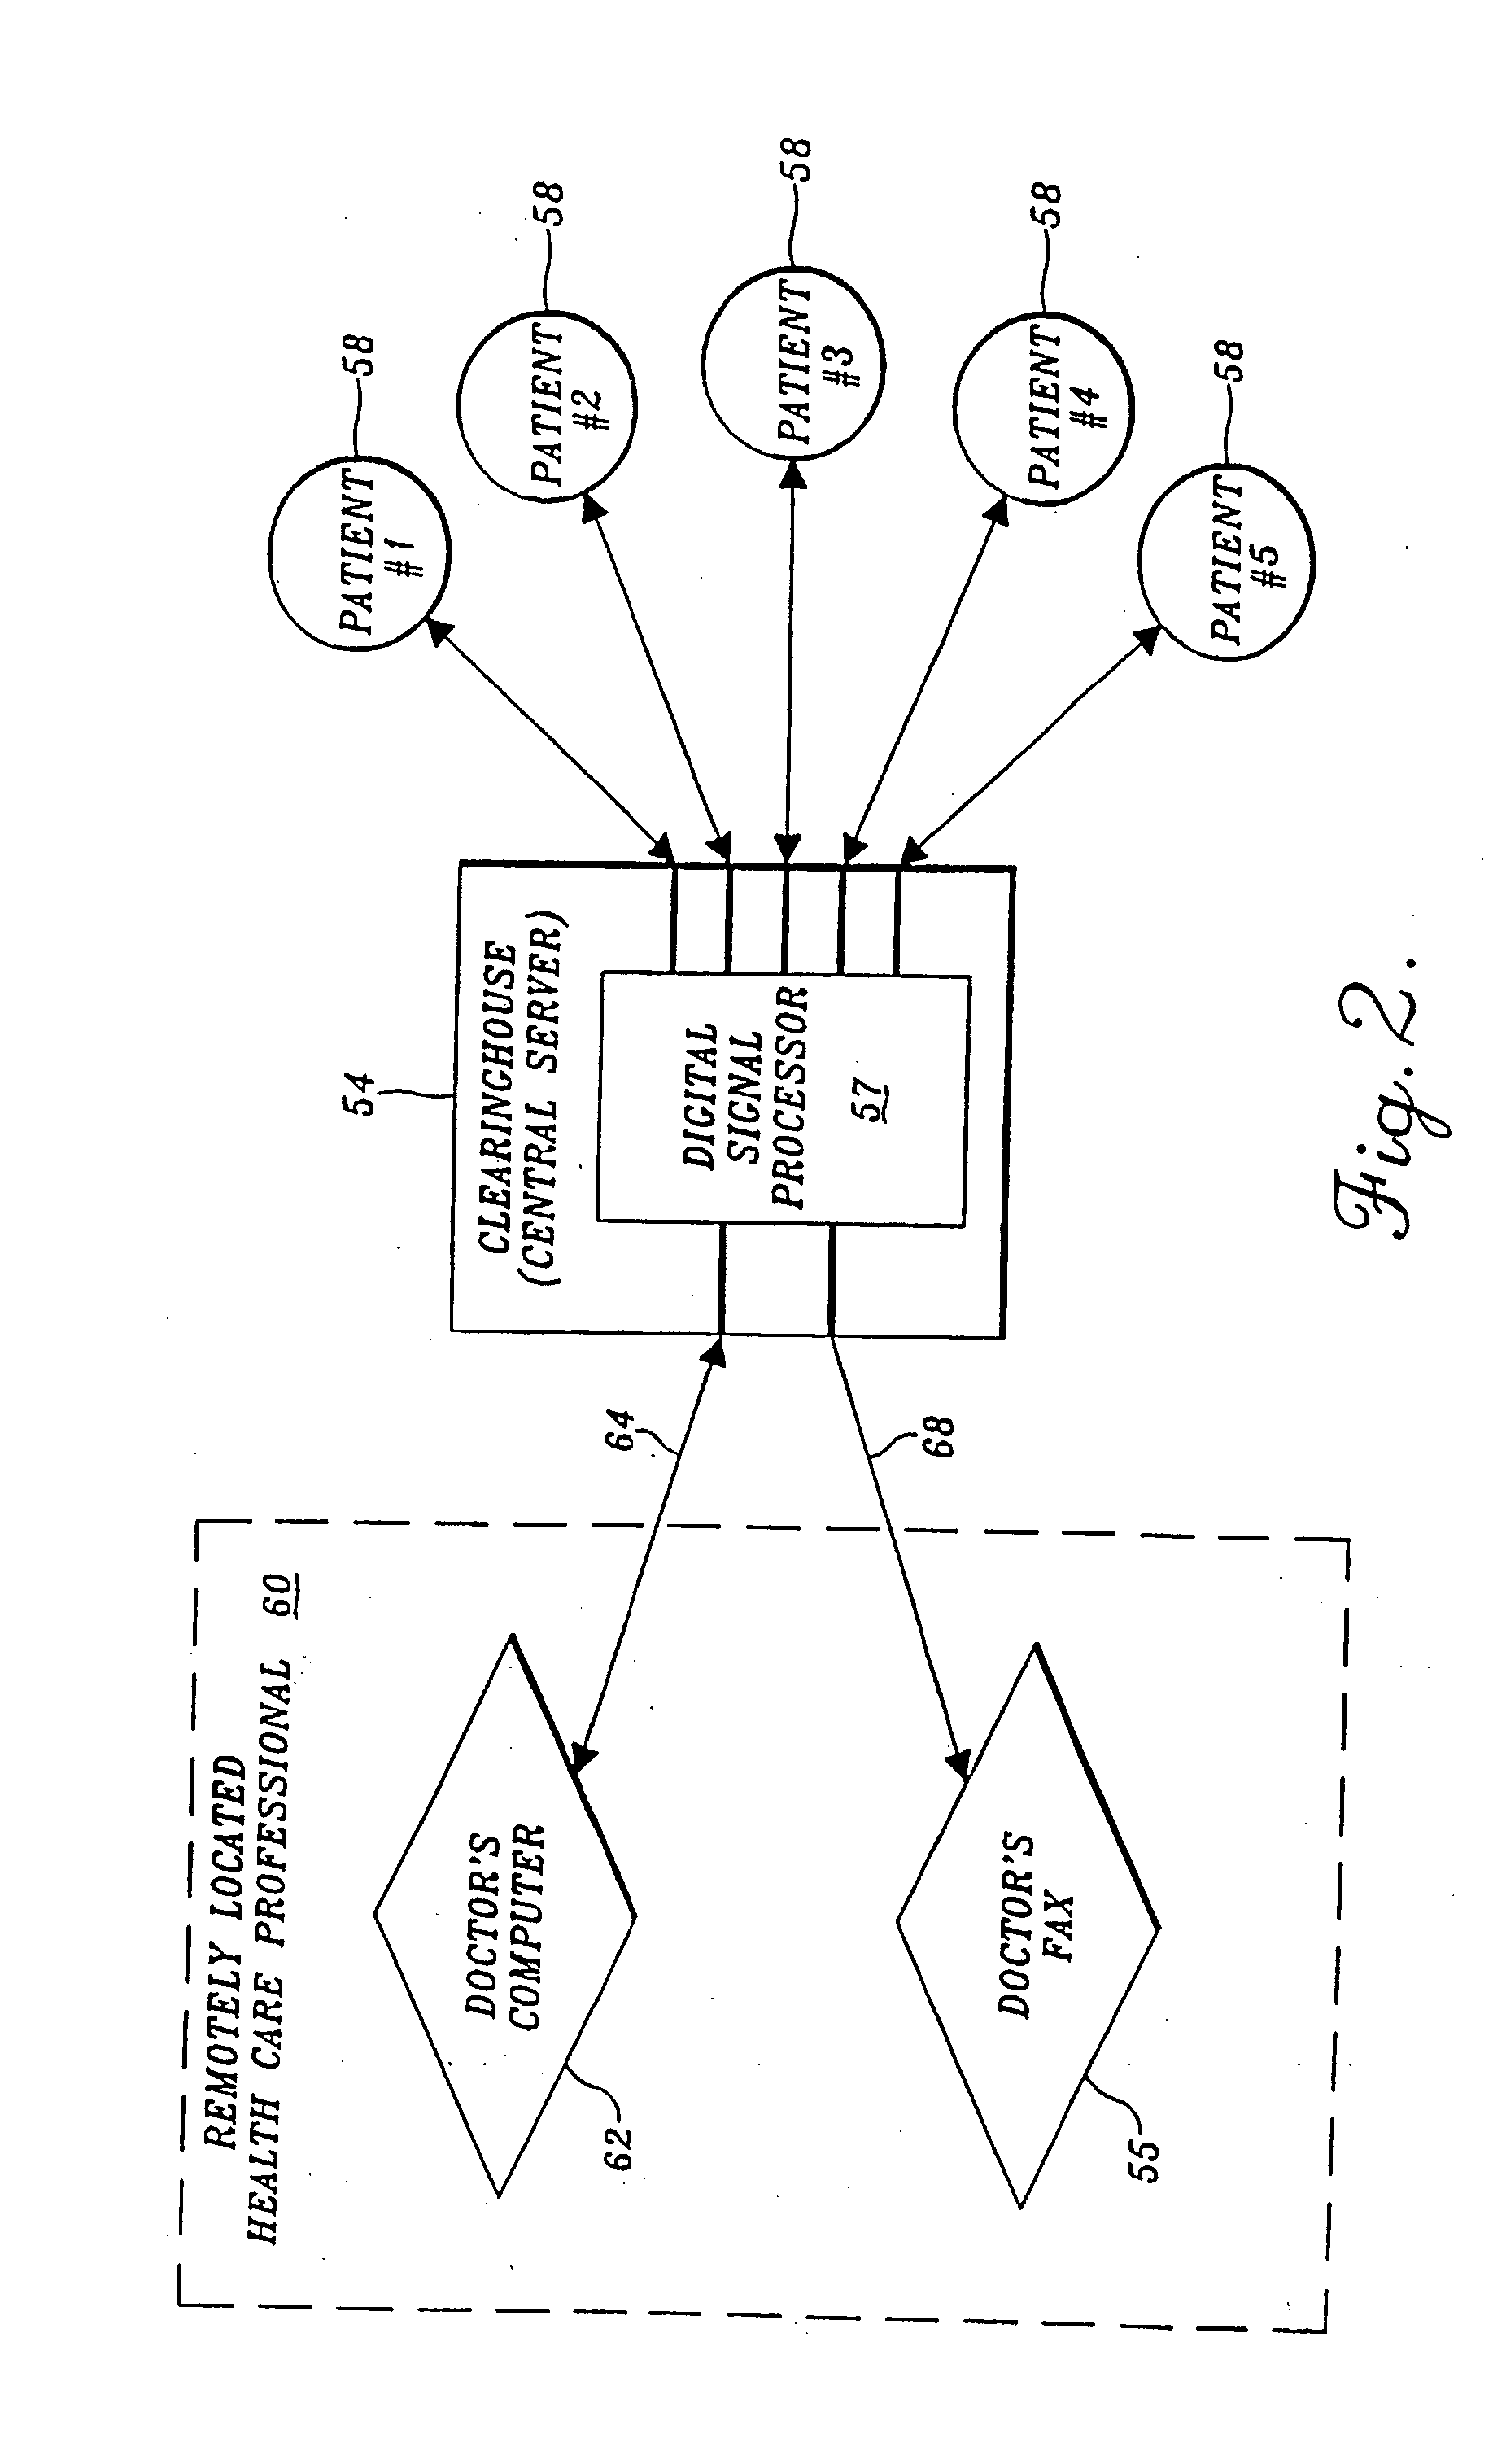 System and methods for monitoring a patient's heart condition